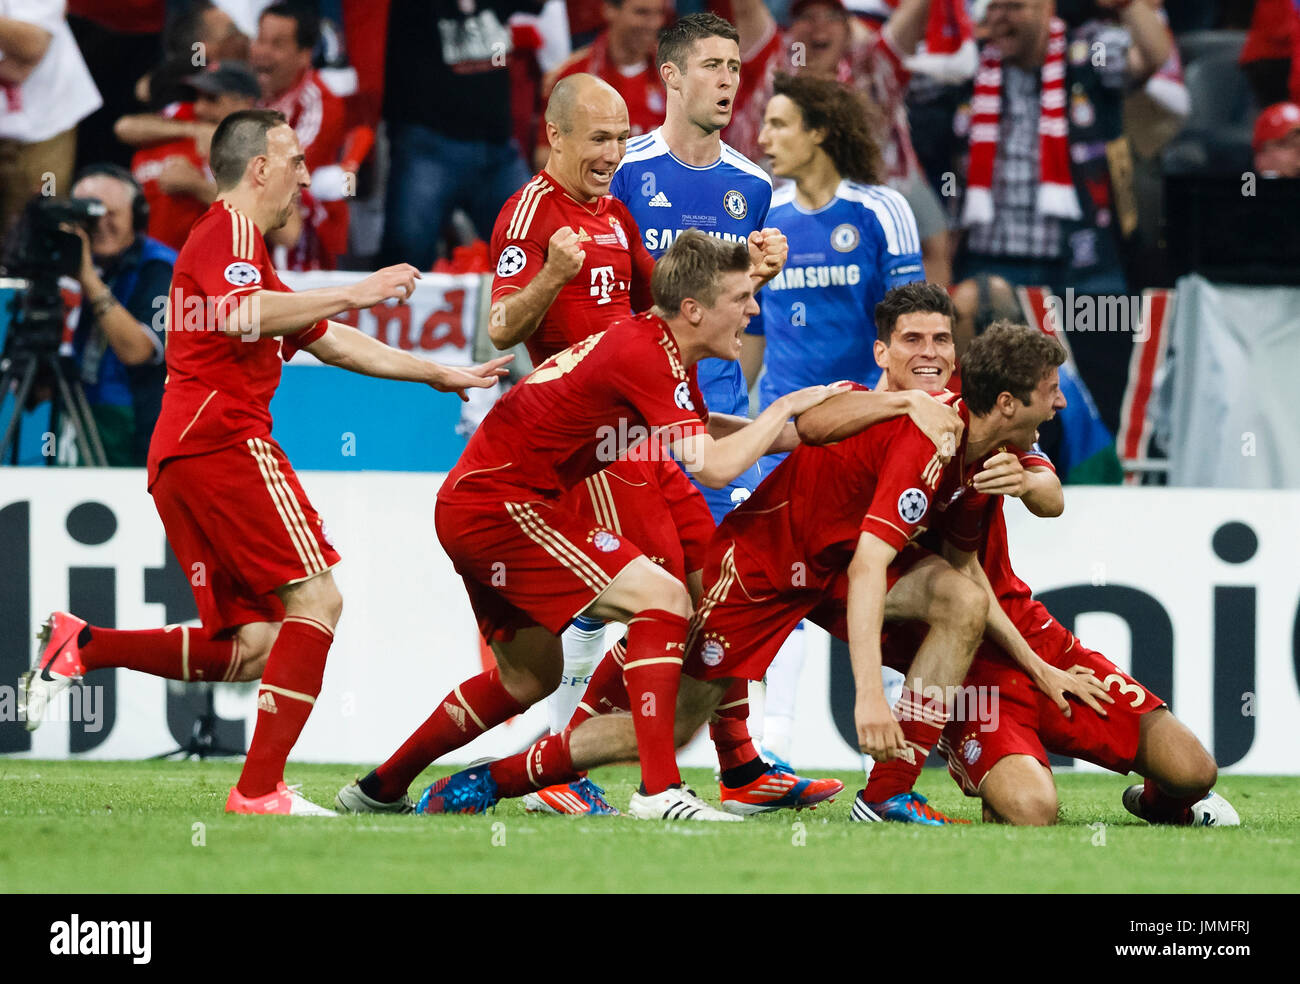 MUNICH, May 19 - Ribery, Robben, Kroos, Gomez and Muller of Bayern celebrate (Cahill, Luiz of Chelsea are behind) during FC Bayern Munich vs. Chelsea FC UEFA Champions League Final game at Allianz Arena on May 19, 2012 in Munich, Germany. Stock Photo